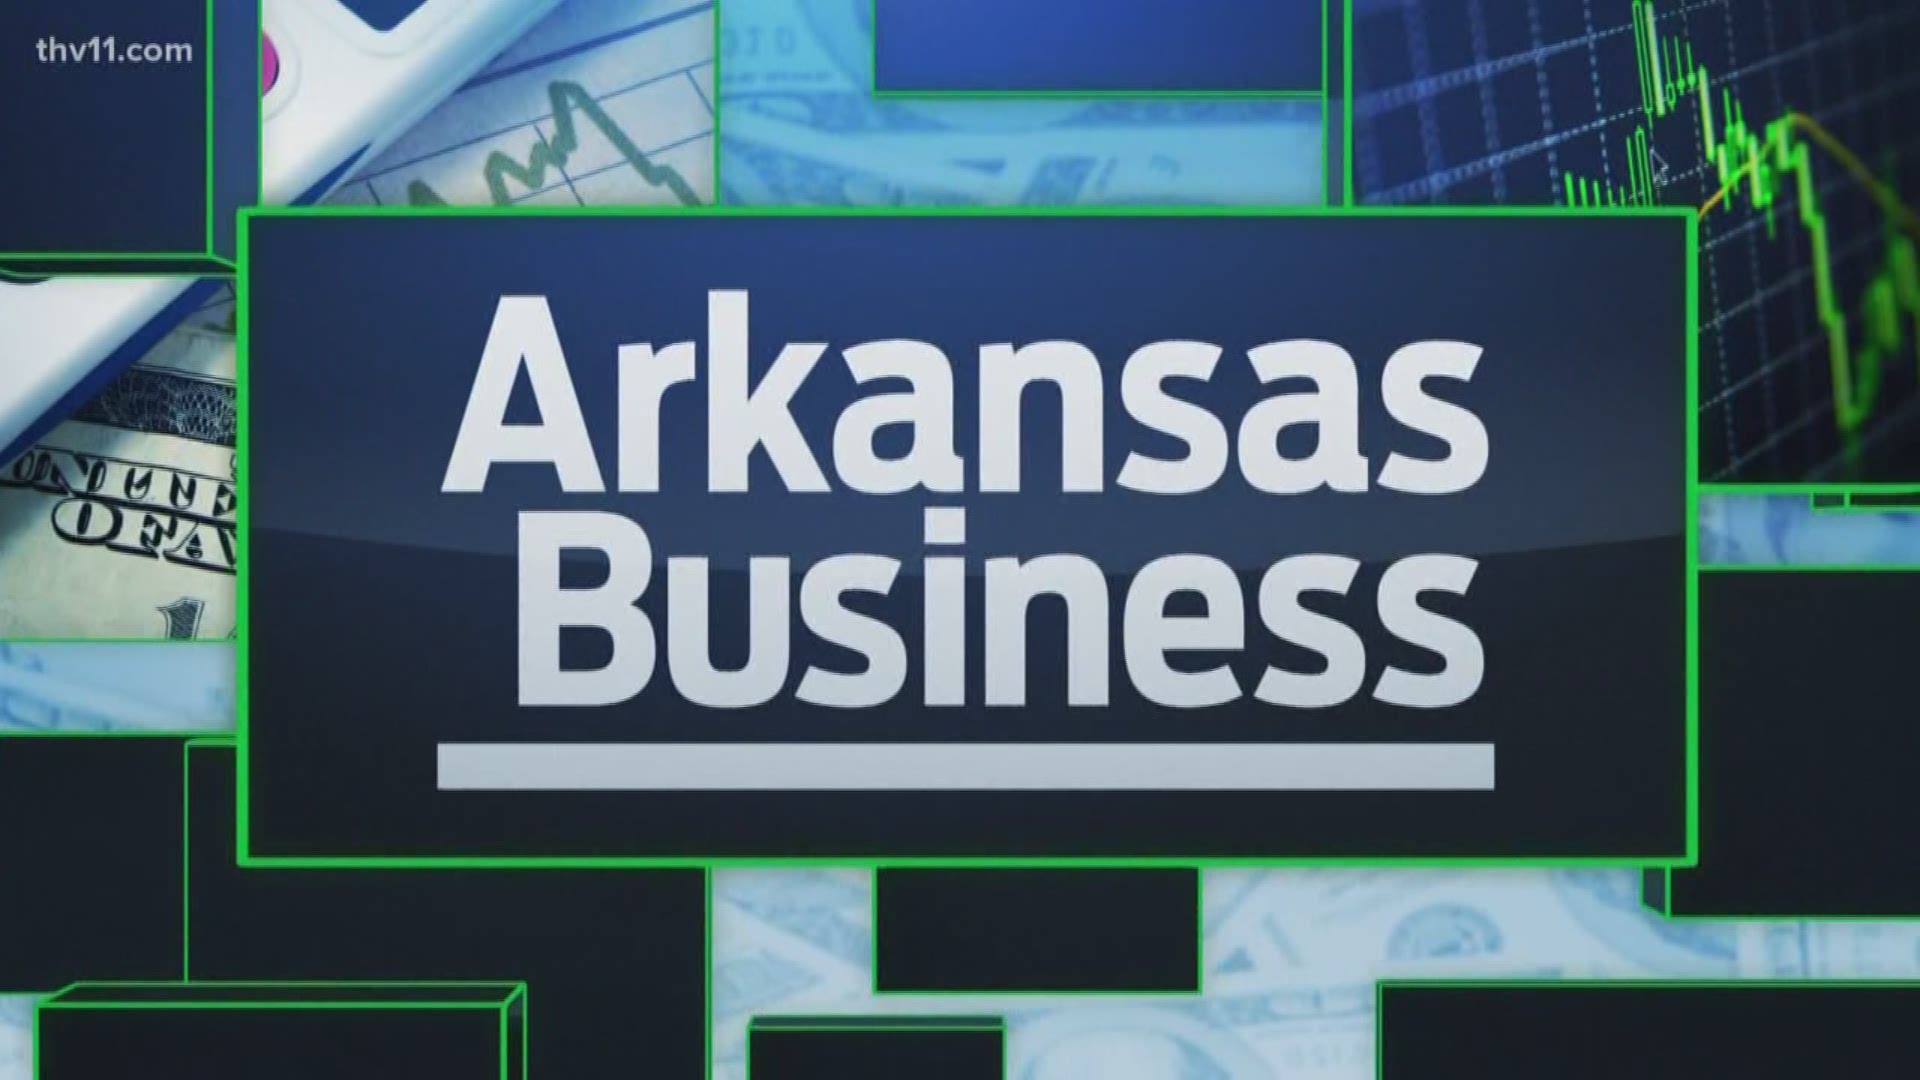 A changing of hands in the Arkansas auto sales market is one of the headlines from Arkansas Business today.